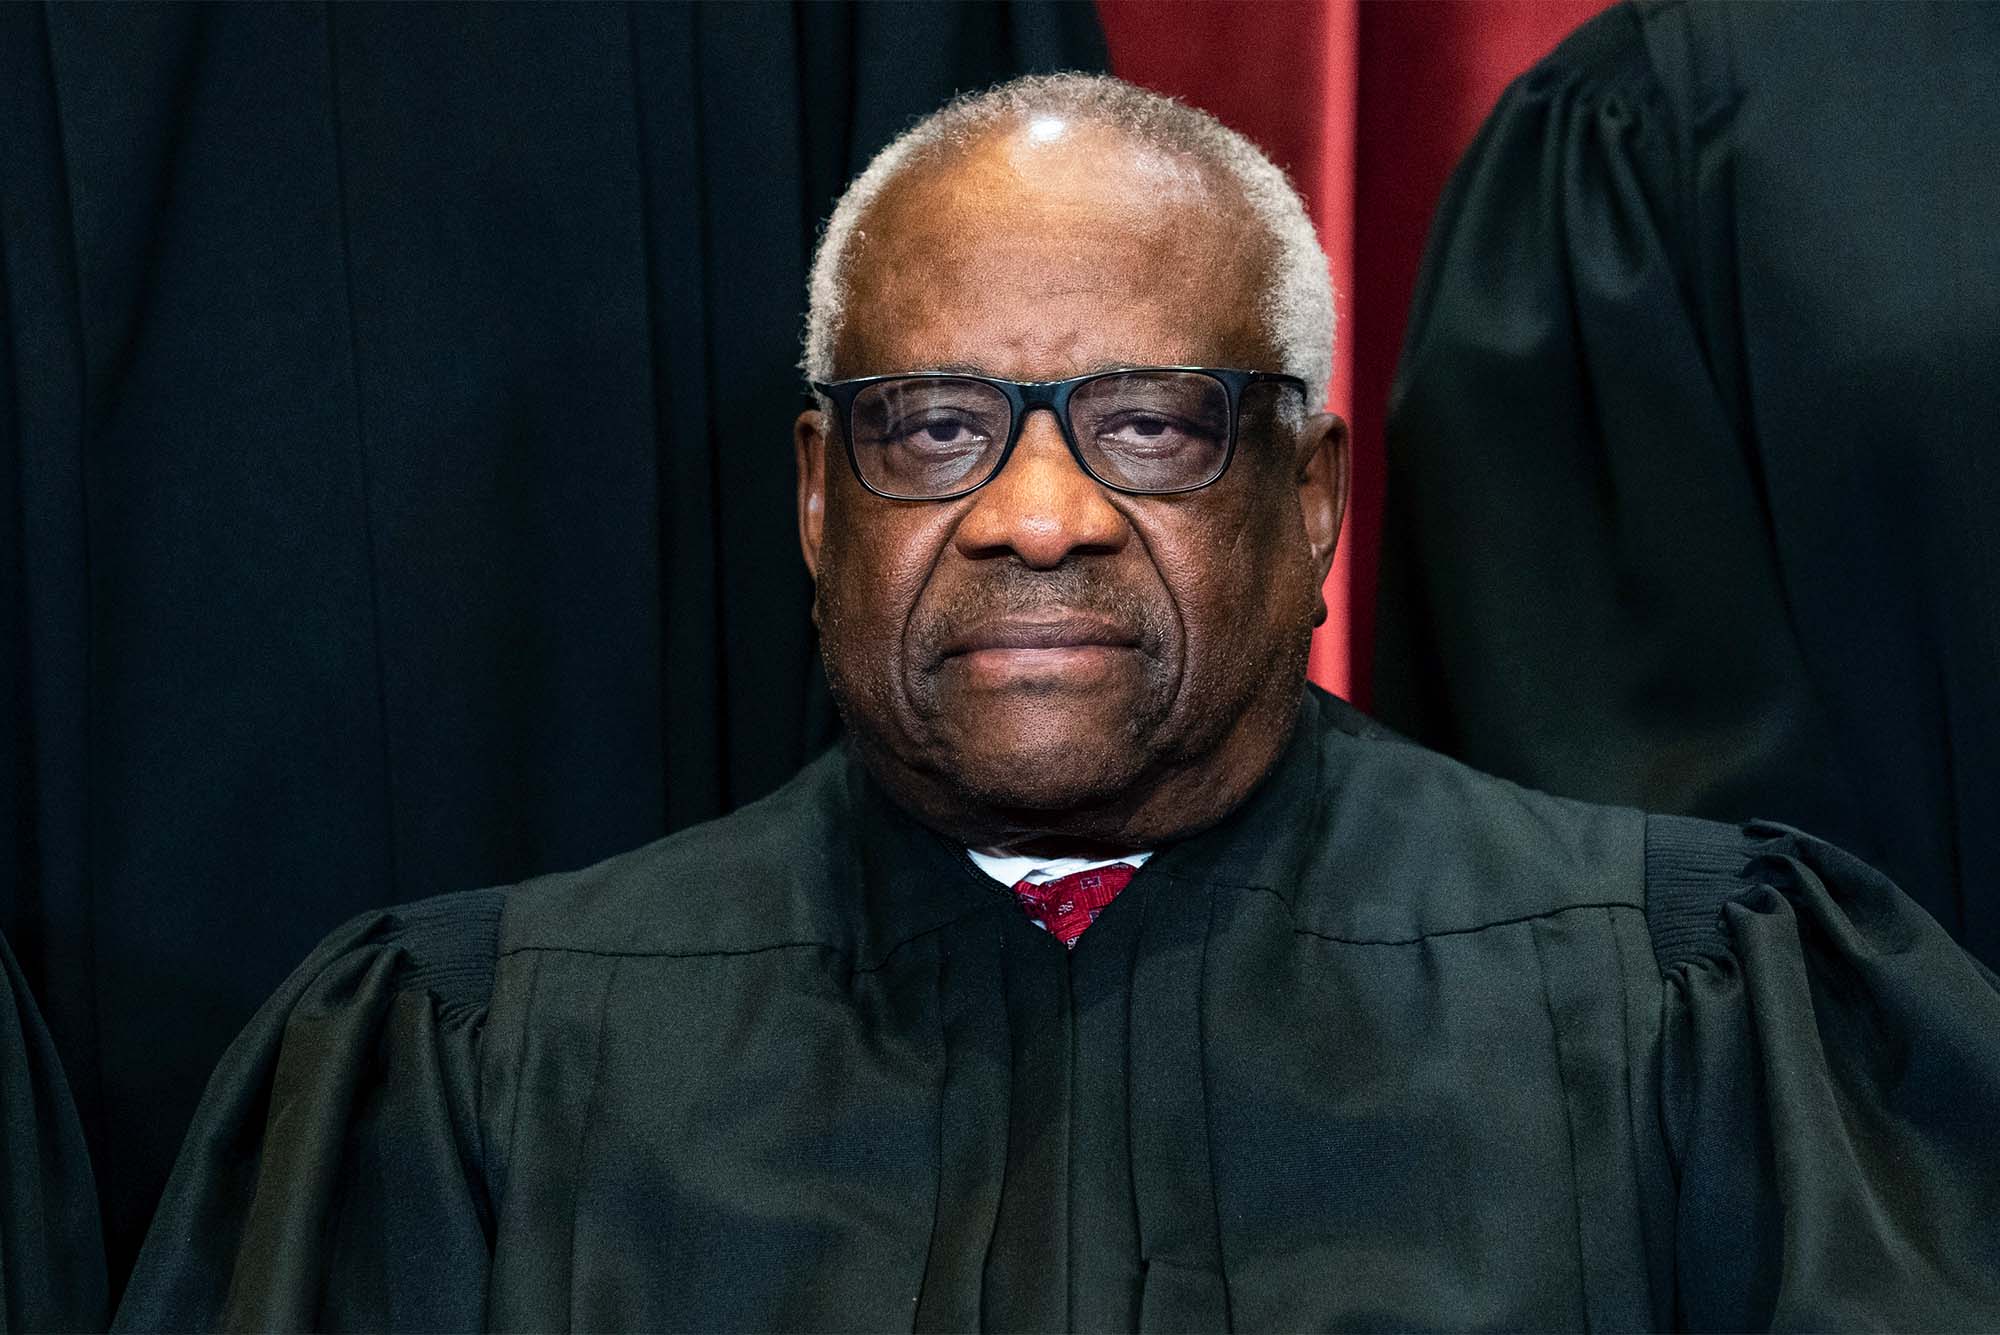 Photo of Clarence Thomas, US Supreme Court Justice, sitting in black robes with glasses. He is a black man with short white hair and a stoic expression